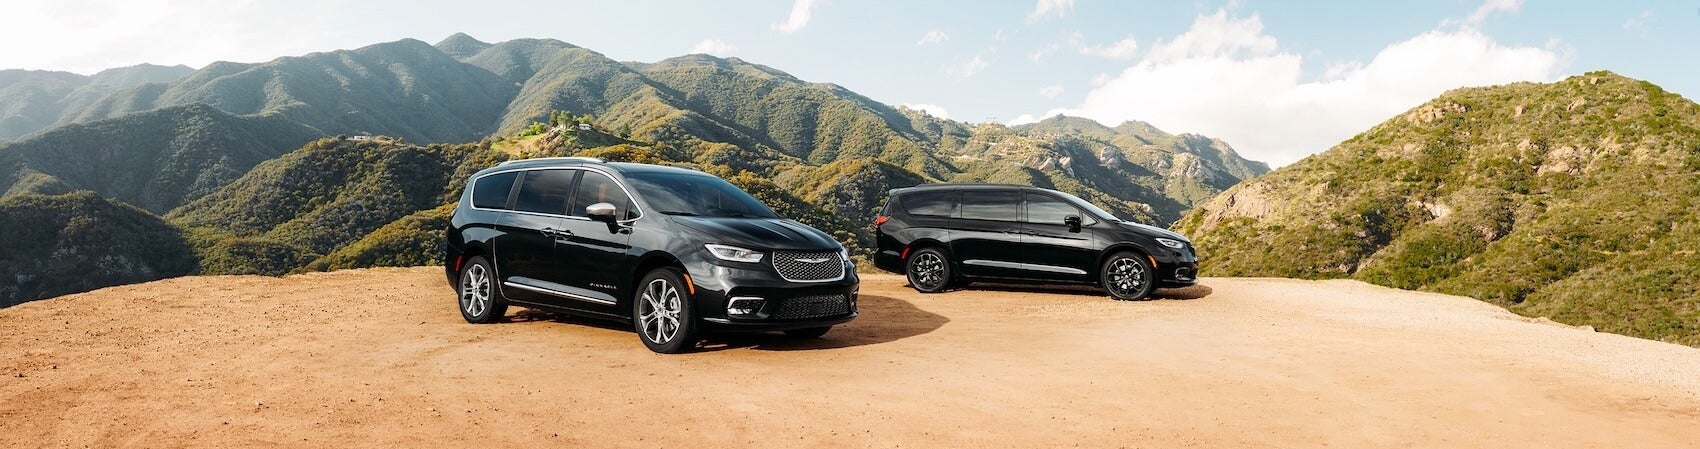 Chrysler Pacifica Reviews